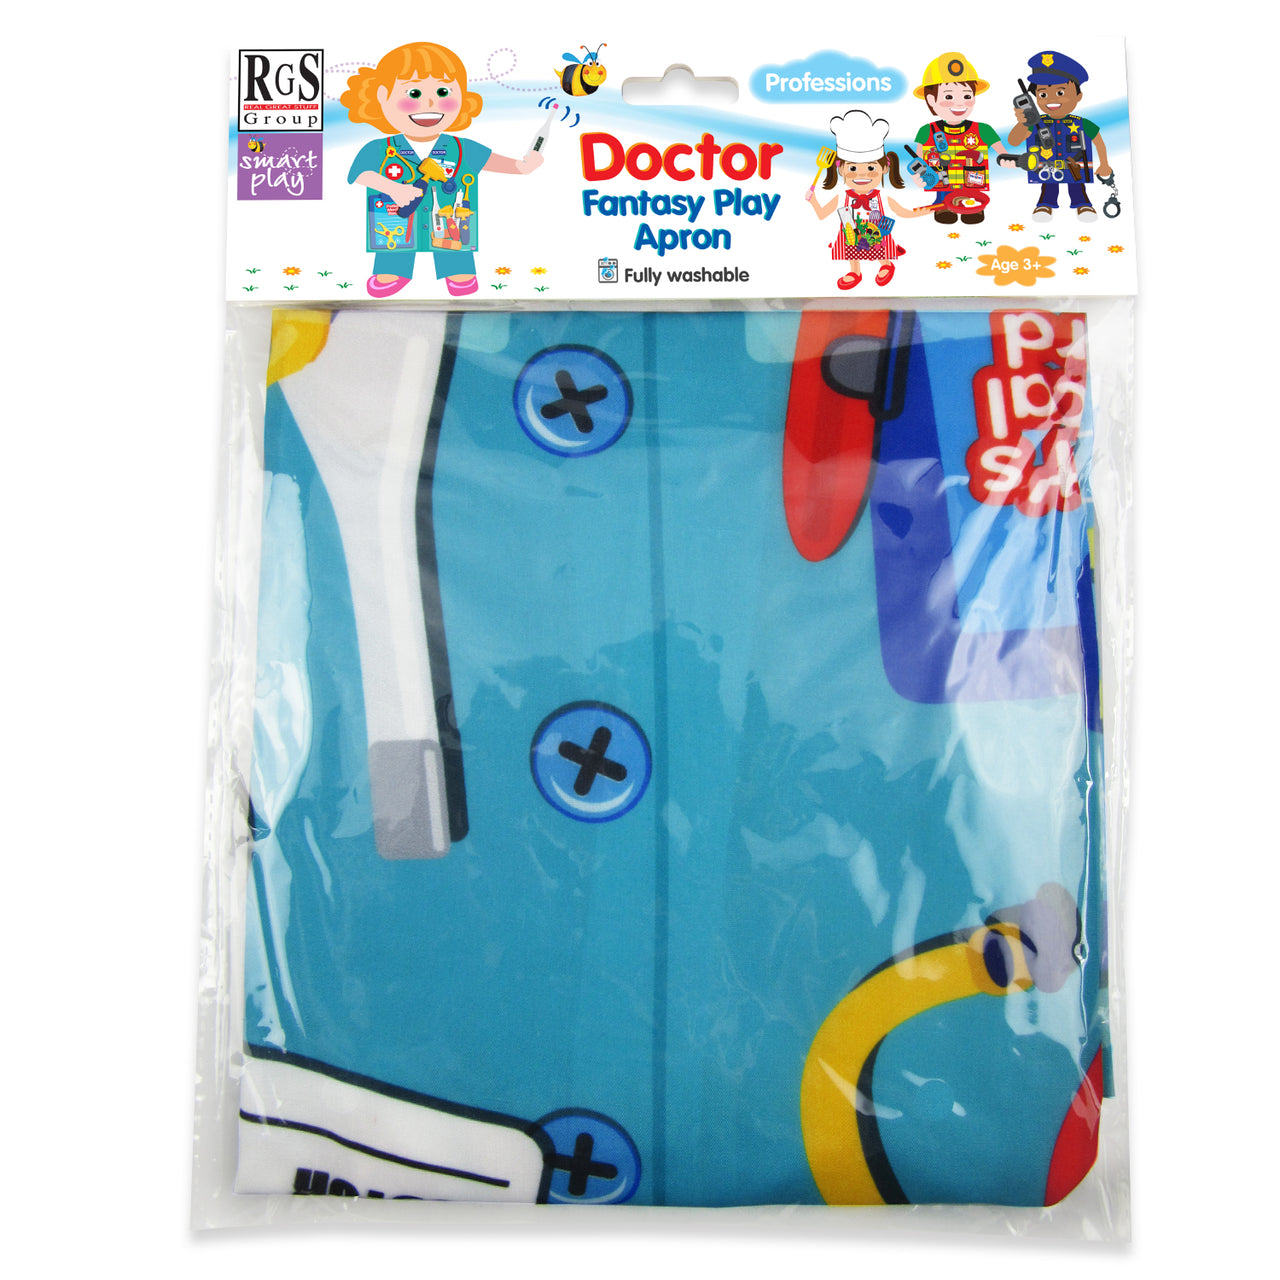 Play Apron - Doctor